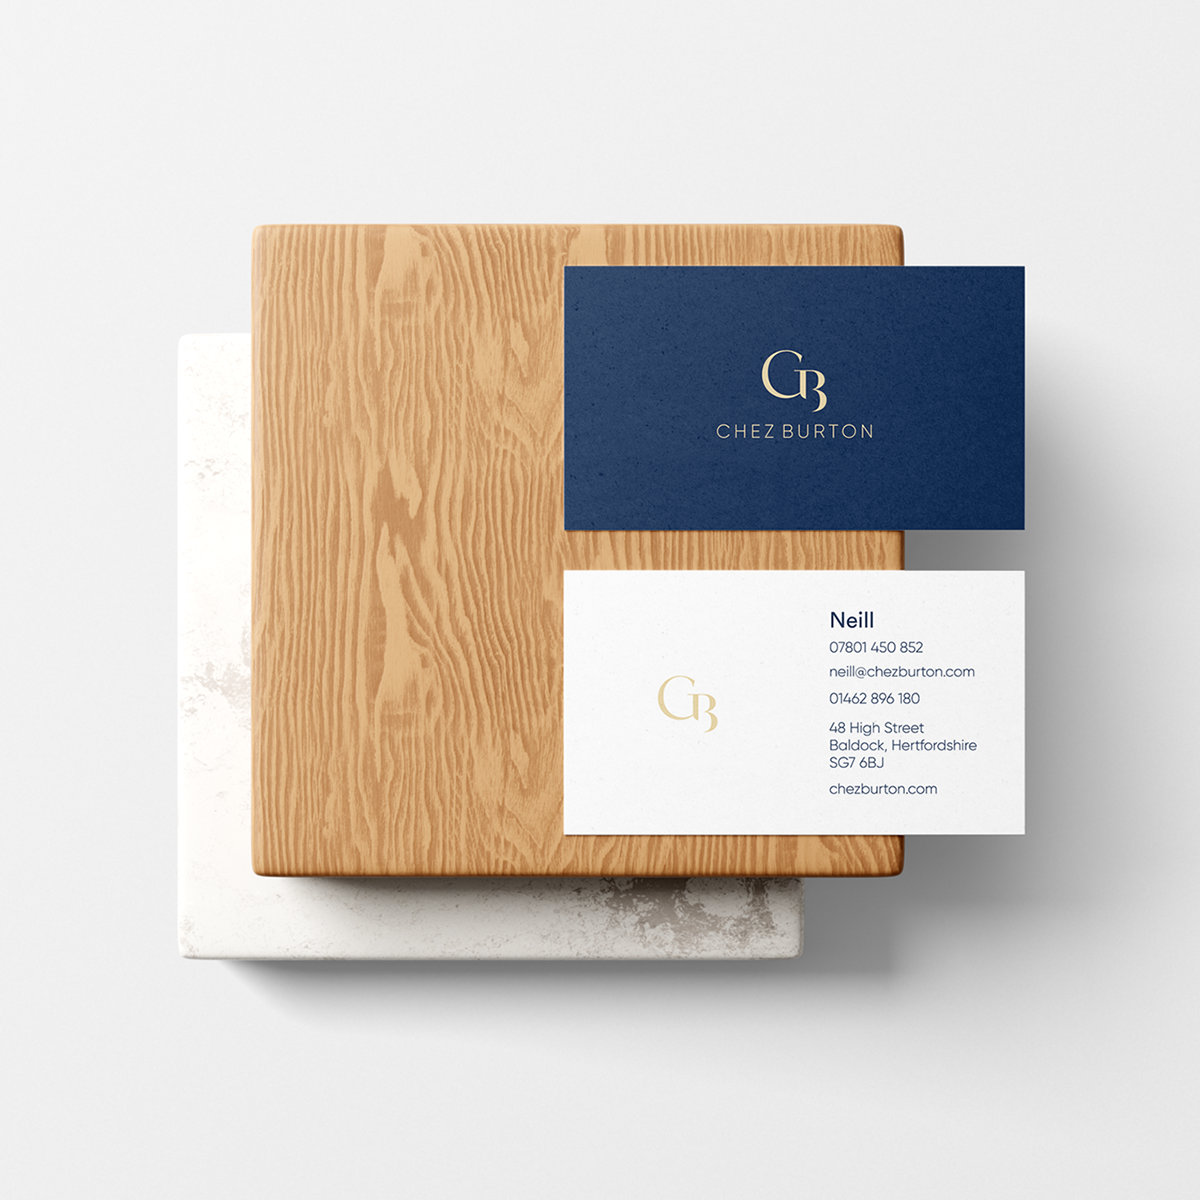 Business card design for Chez Burton set over a wooden chopping board.